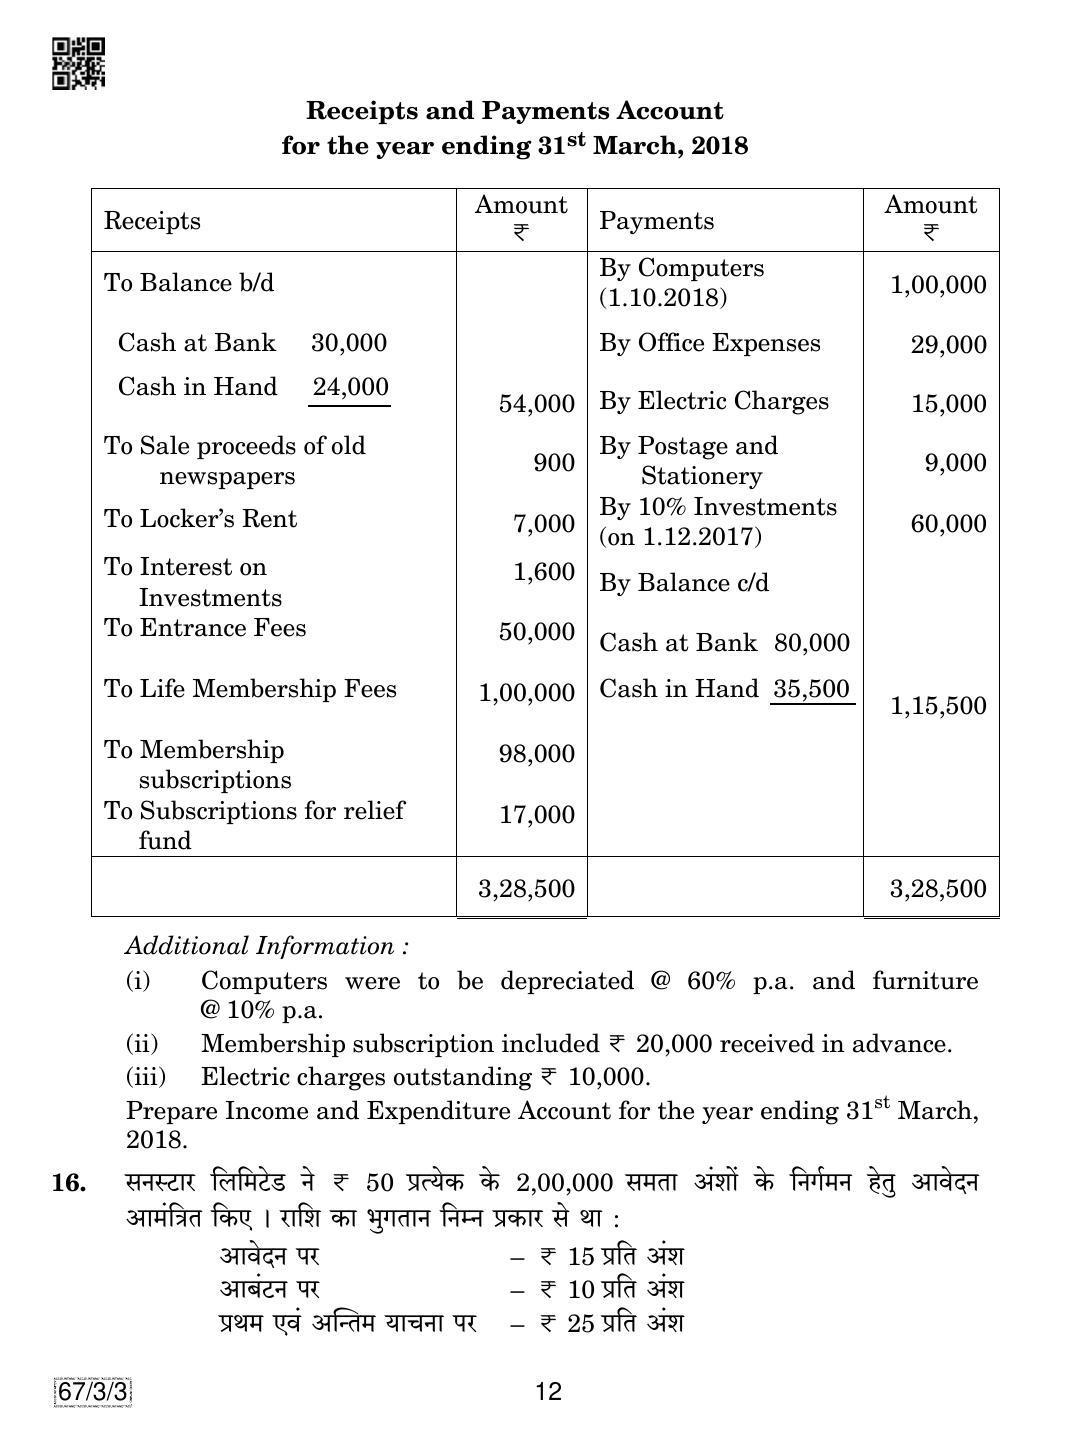 CBSE Class 12 67-3-3 Accountancy 2019 Question Paper - Page 12